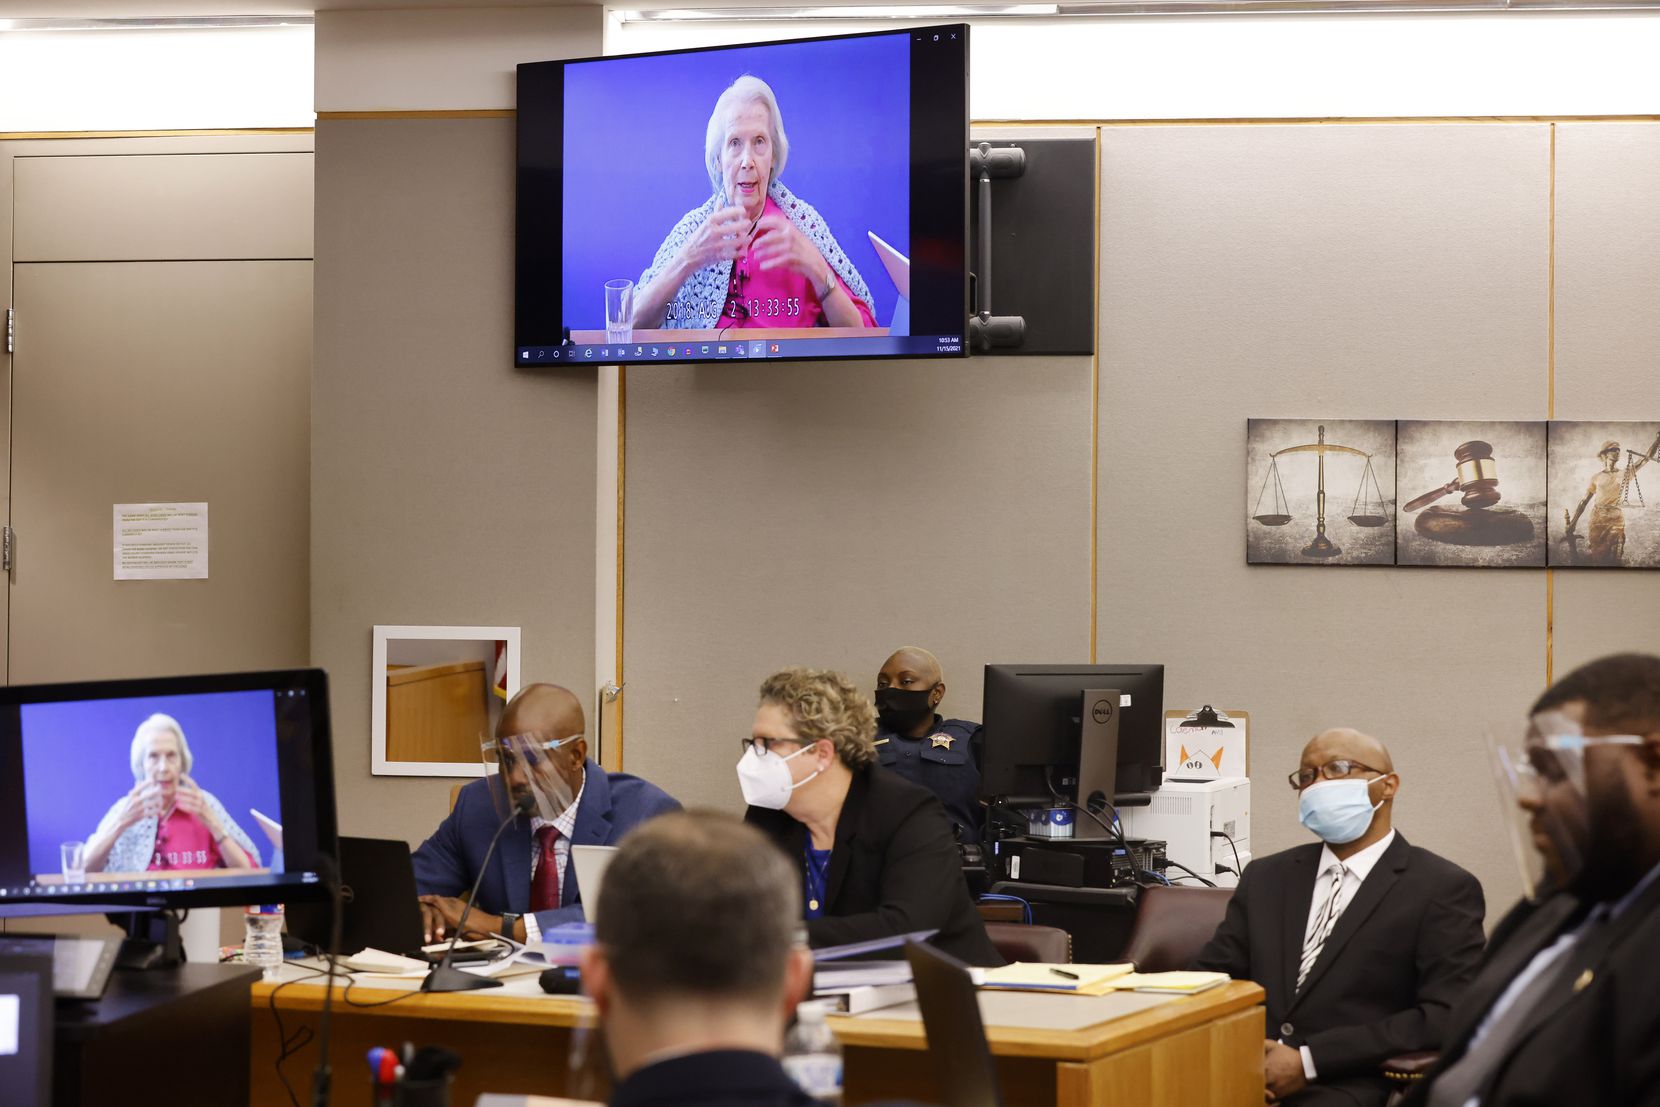 A video deposition by victim Mary Bartel is shown to jurors as she responded to questions from the prosecution and the defense.